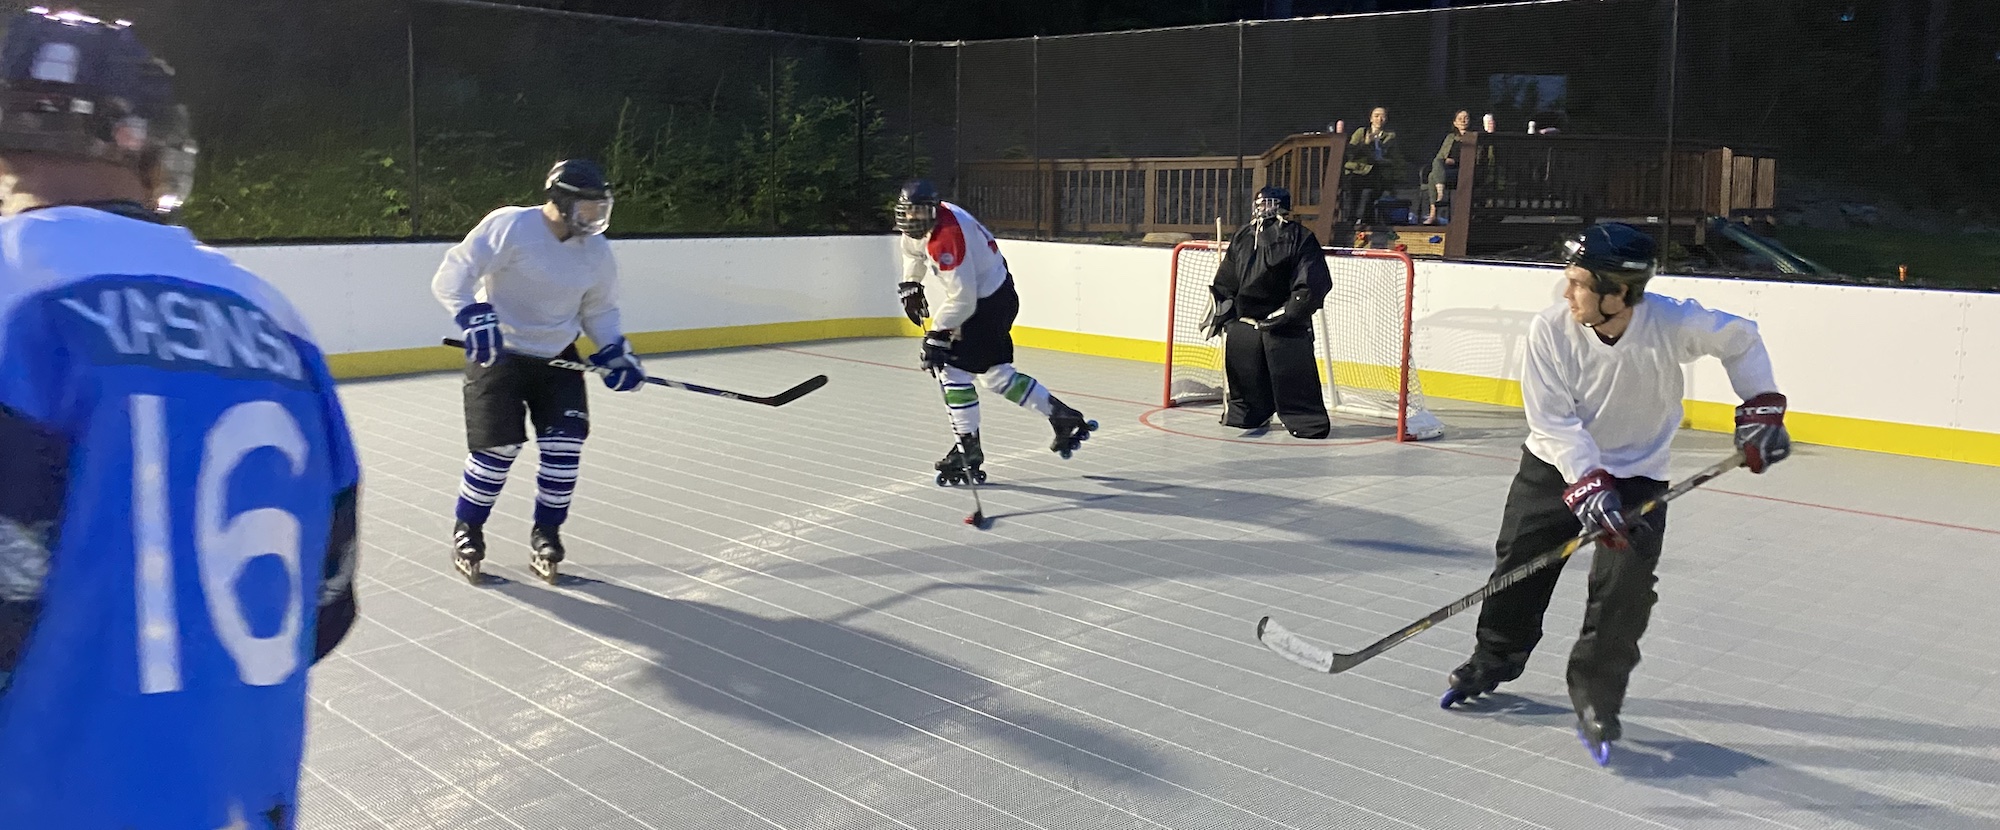 Photo of Roller hockey players mid-game